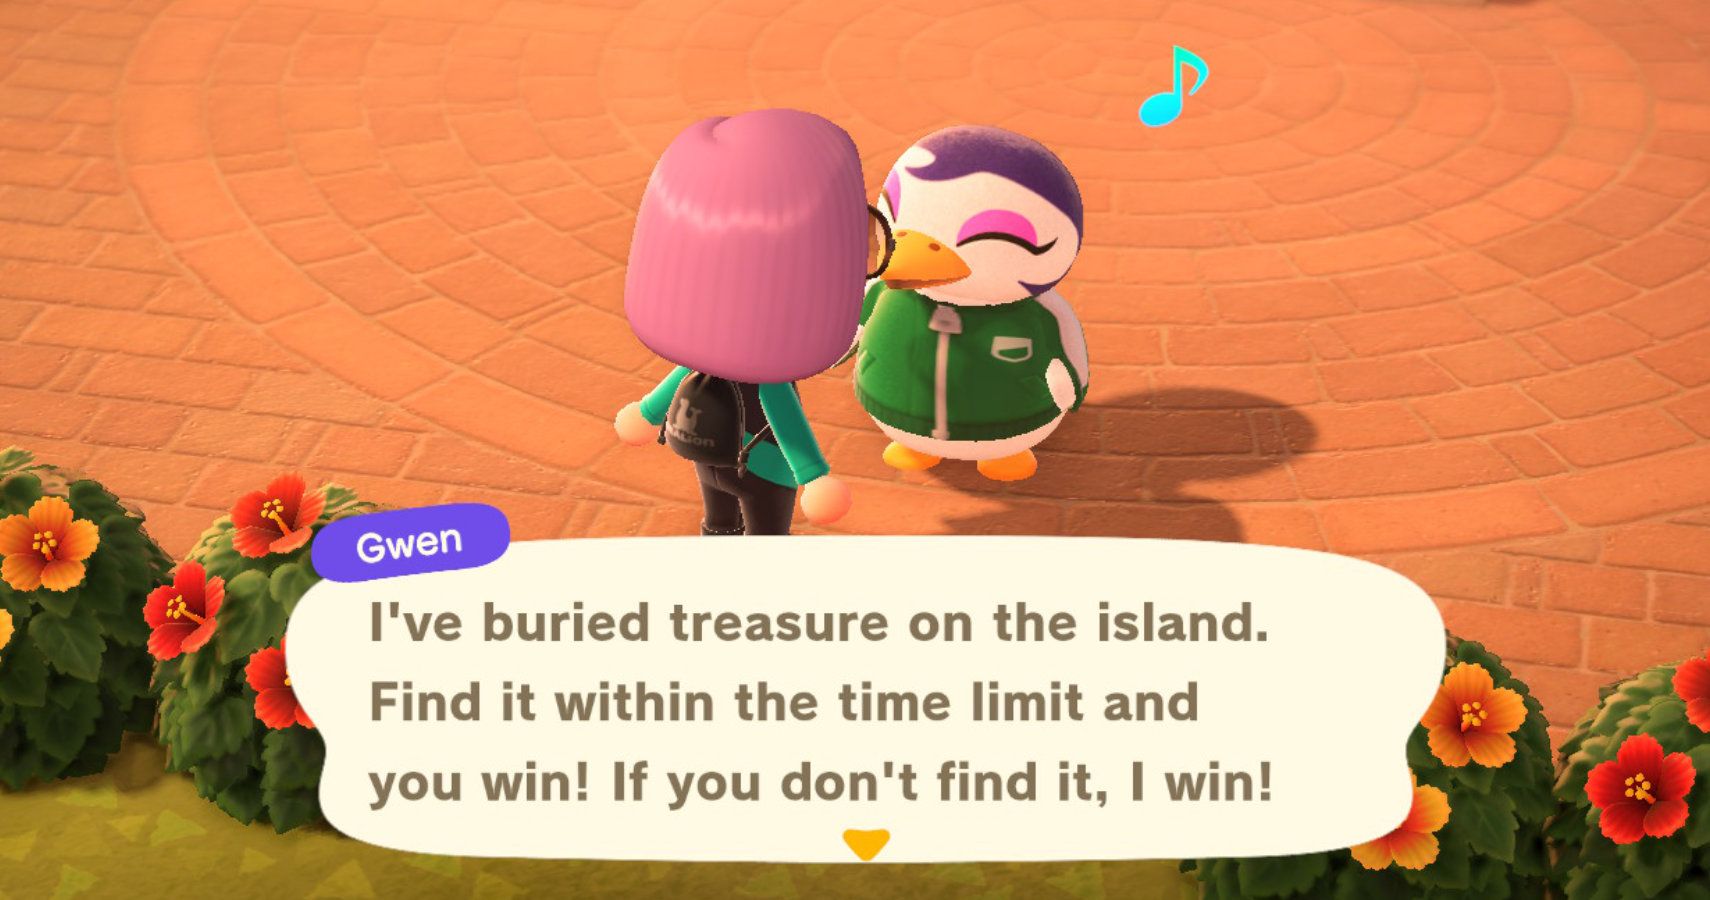 Gwen offering a buried treasure quest